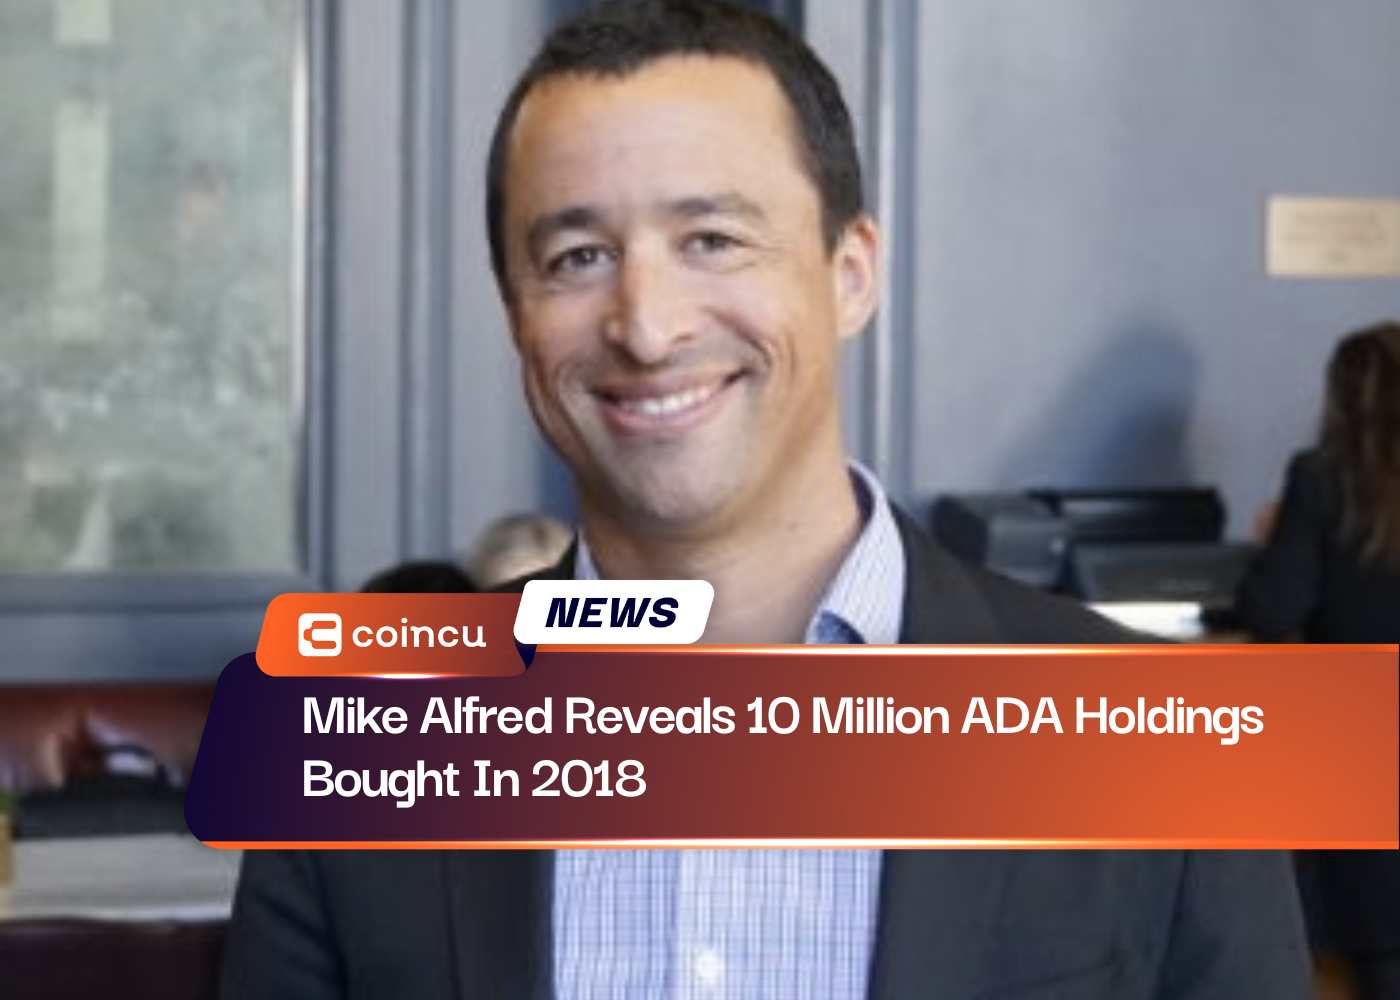 Mike Alfred Reveals 10 Million ADA Holdings Bought In 2018